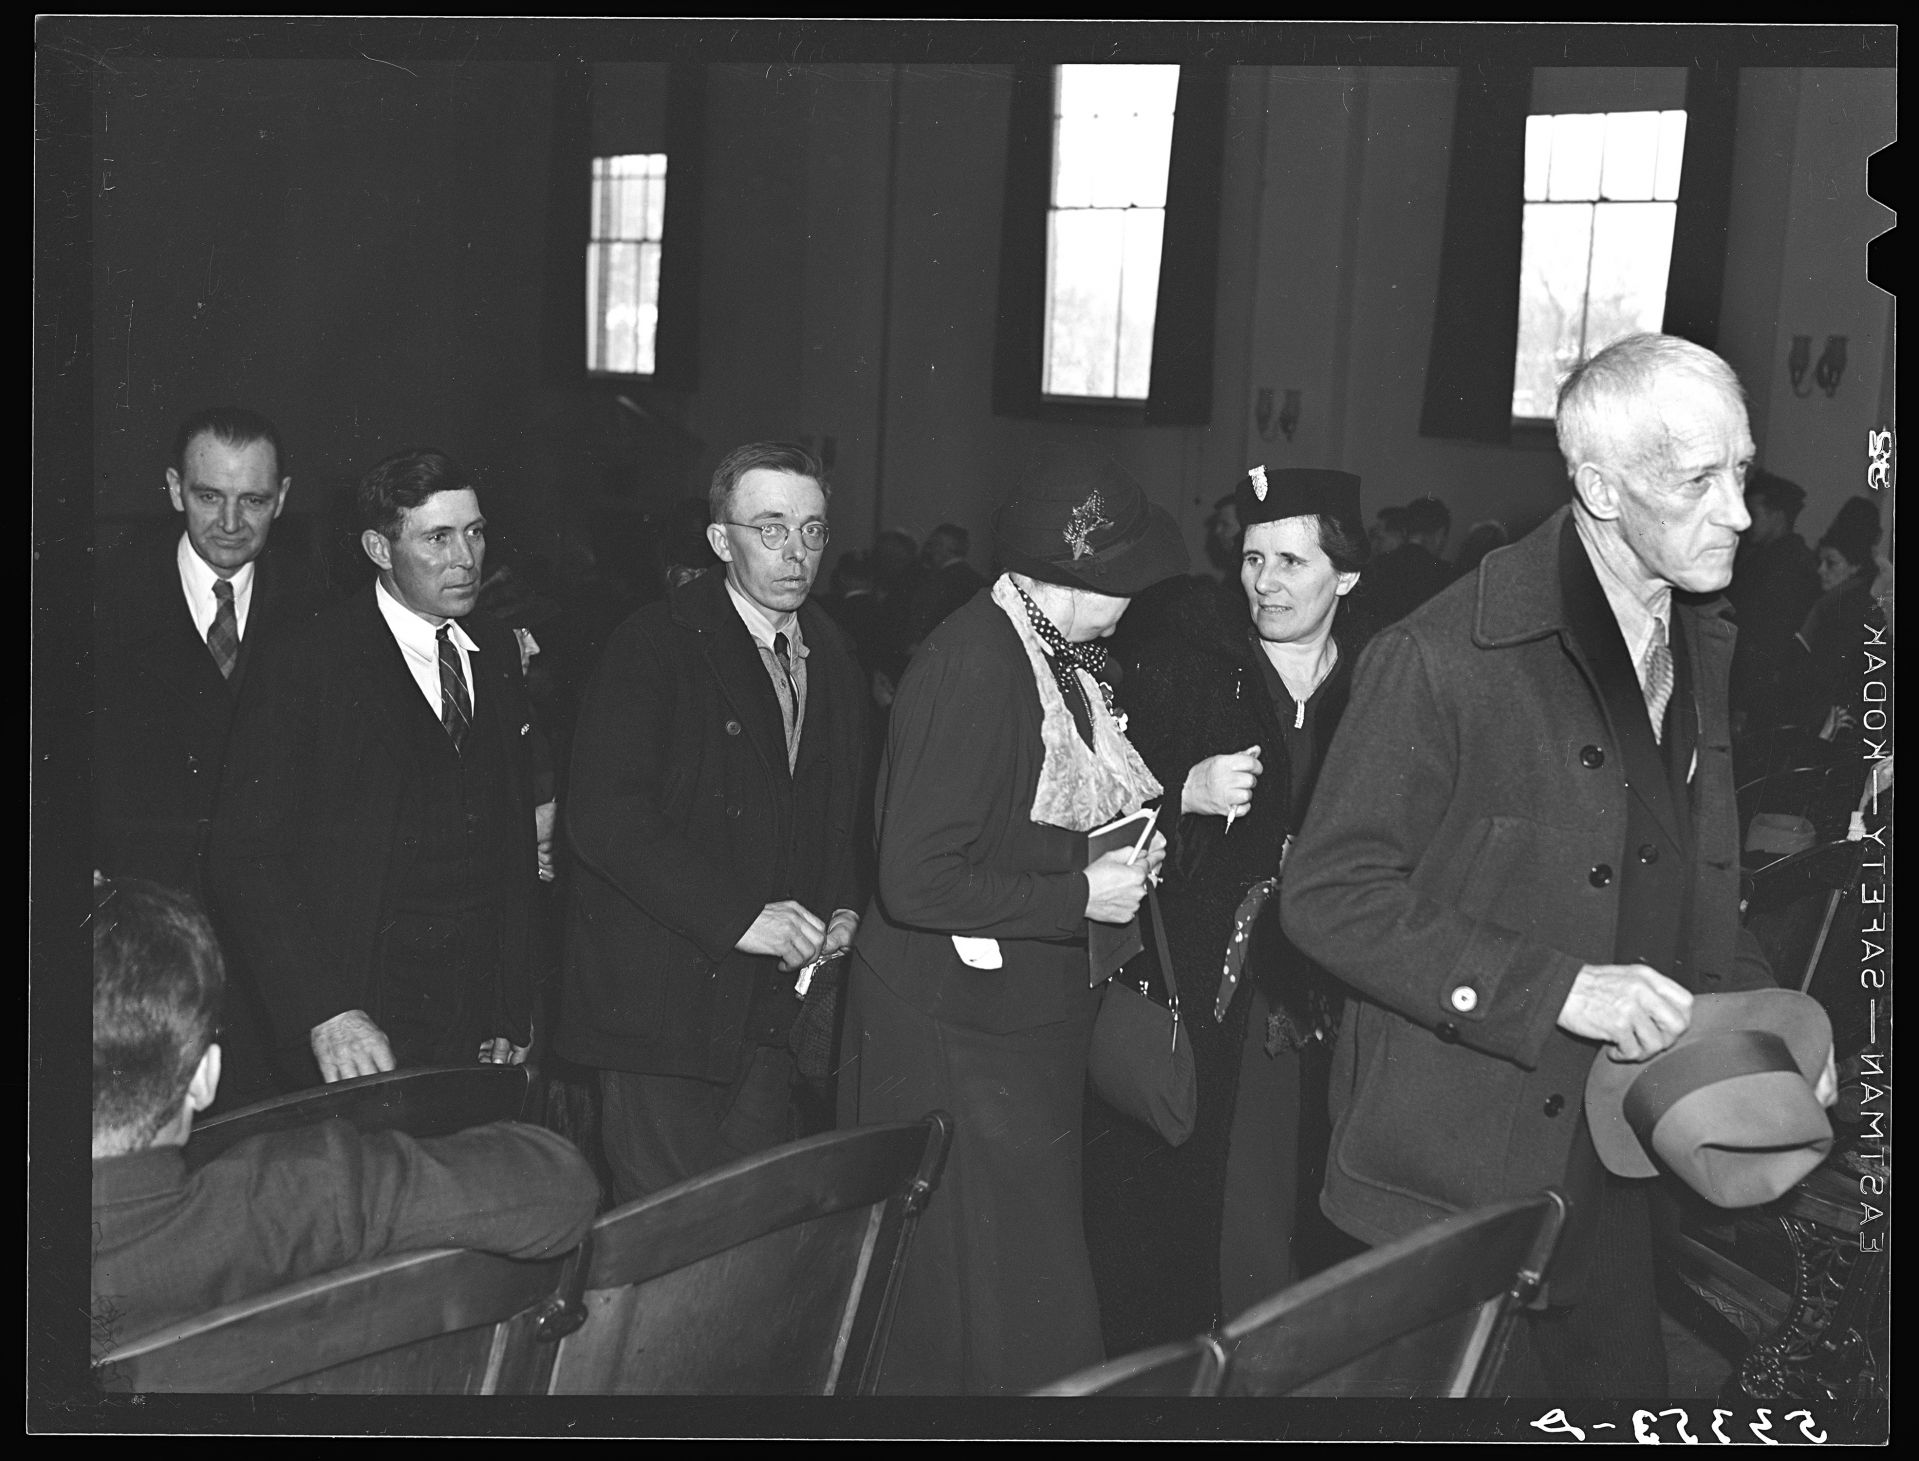 https://hdl.loc.gov/loc.pnp/fsa.8c11728Townspeople going to vote by ballot on whether or not pinball machines should be allowed. Town meeting, Woodstock, VermontWolcott, Marion Post, photographer. Townspeople going to vote by ballot on whether or not pinball machines should be allowed. Town meeting, Woodstock, Vermont. United States Vermont Windsor County Woodstock Woodstock, 1940. Mar. Photograph. https://www.loc.gov/item/2017802636/.